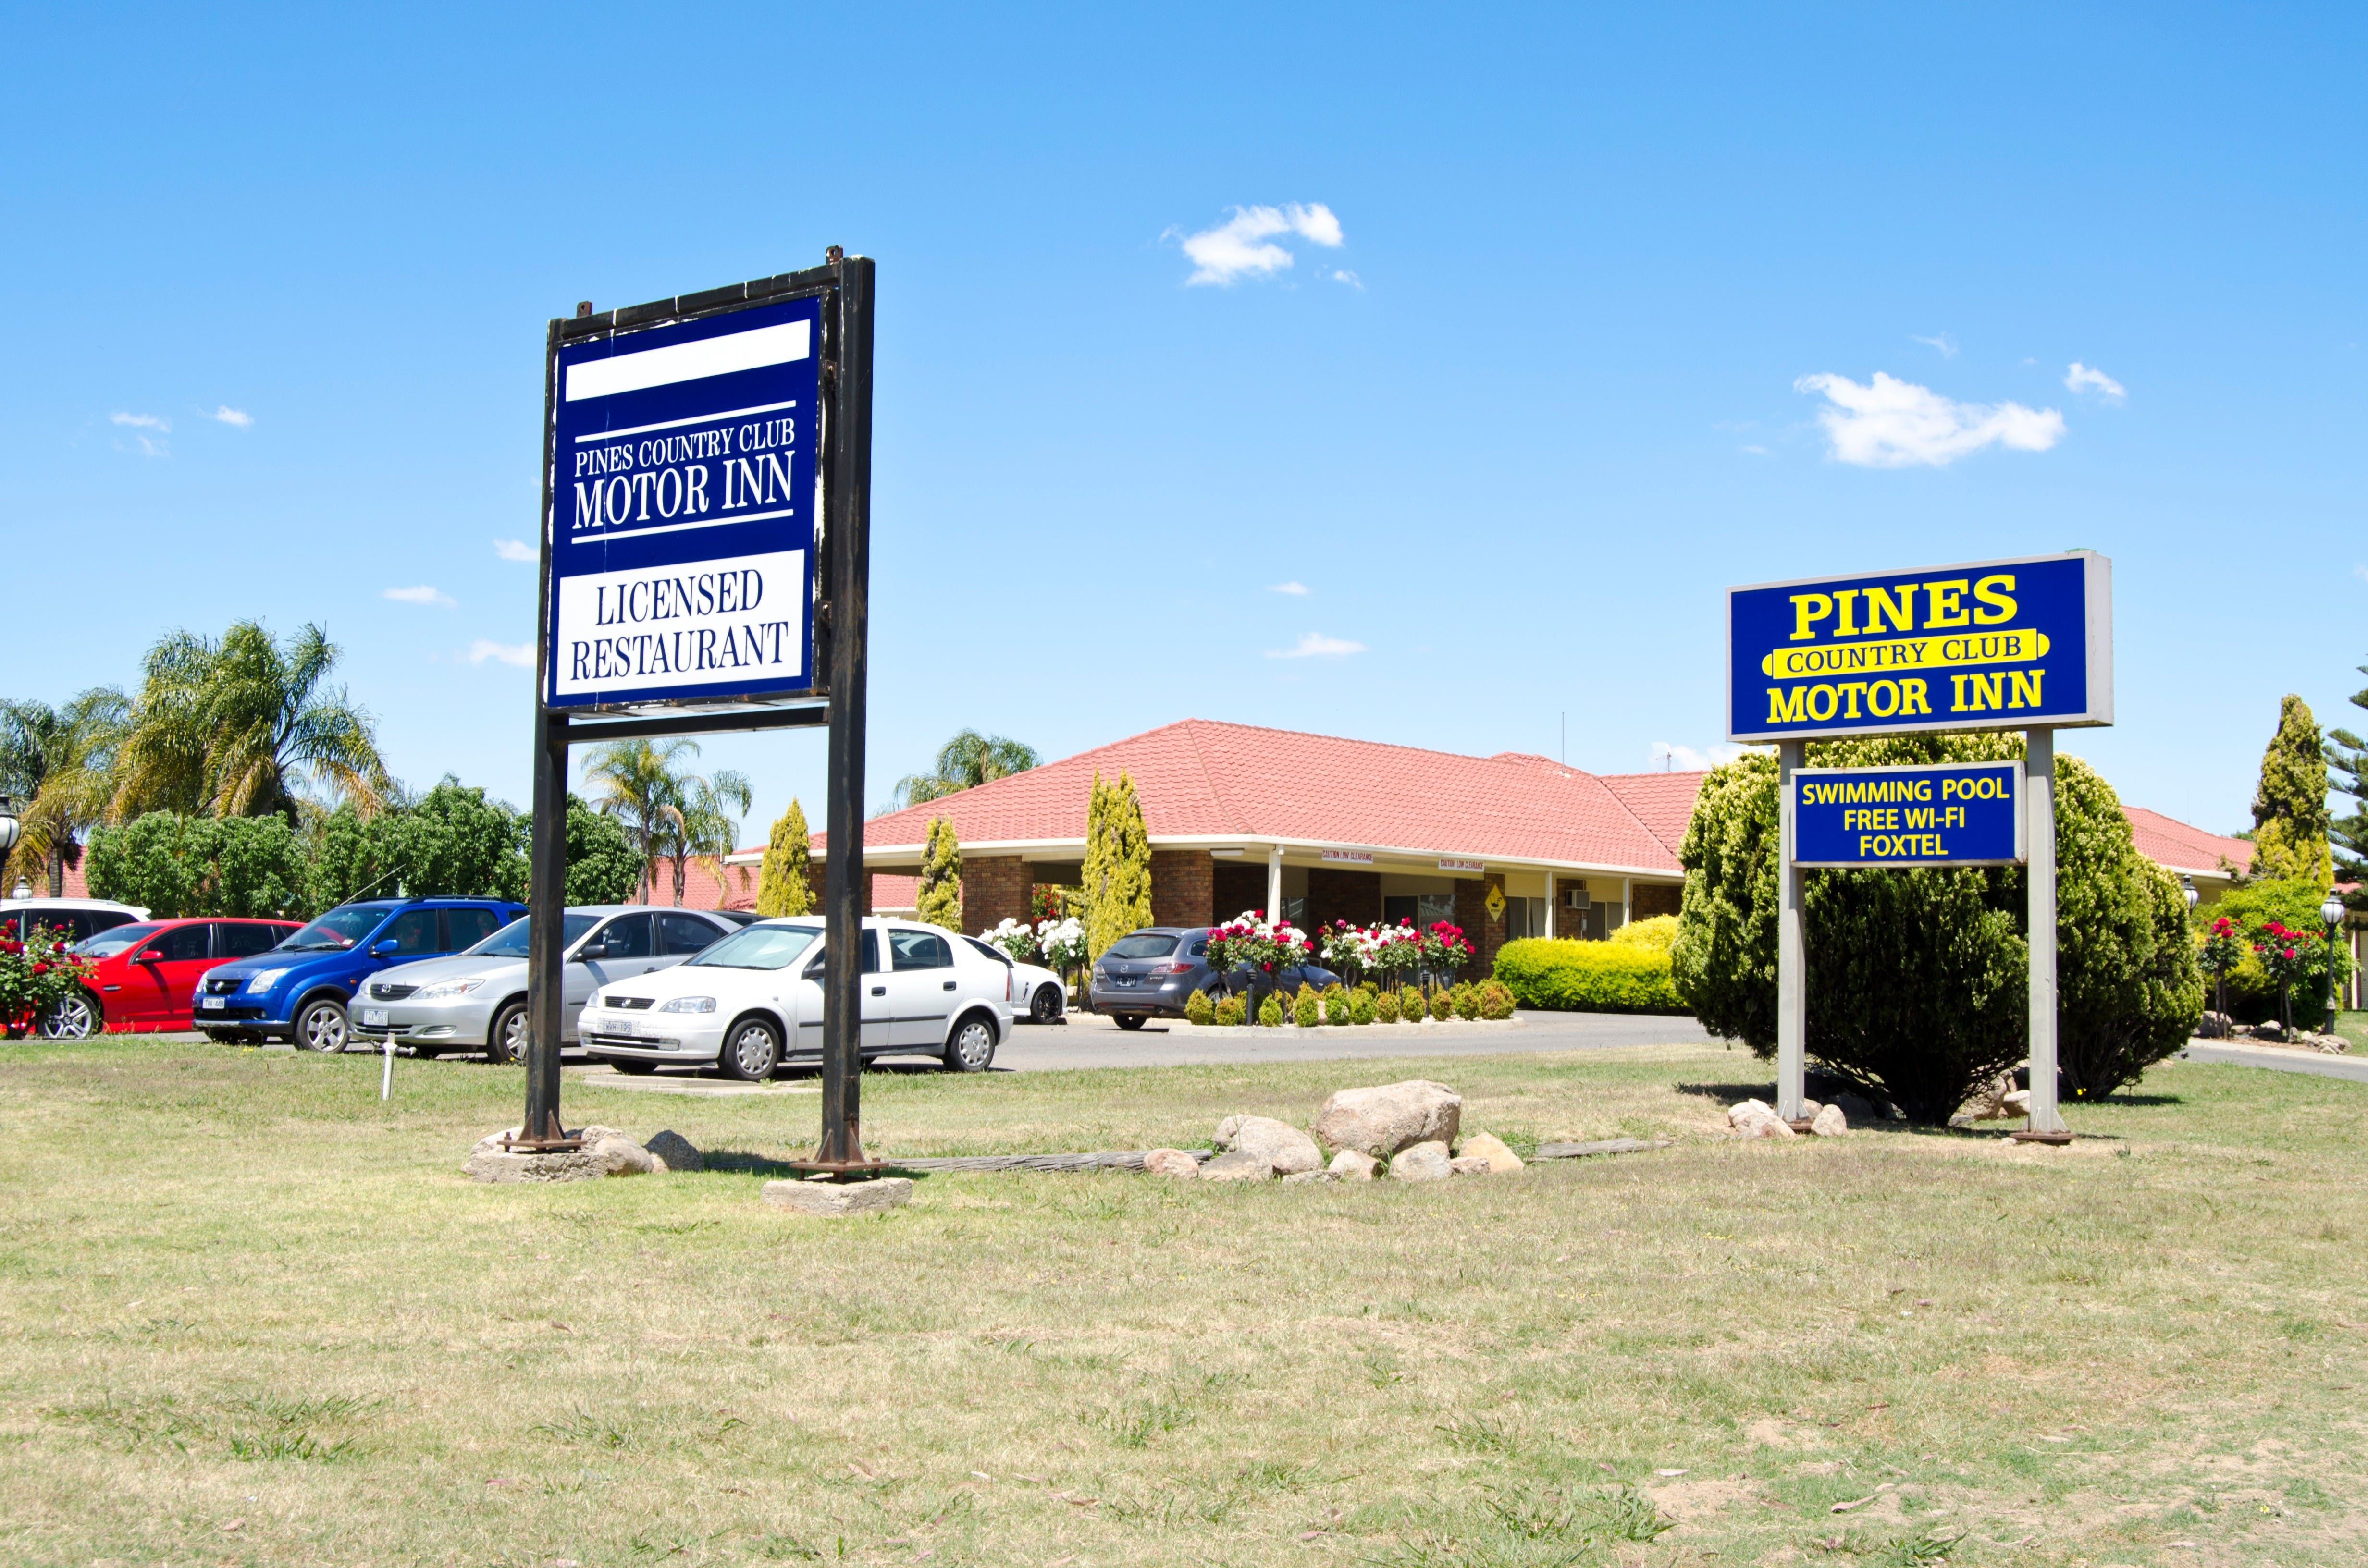 Pines Country Club Motor Inn - Dalby Accommodation